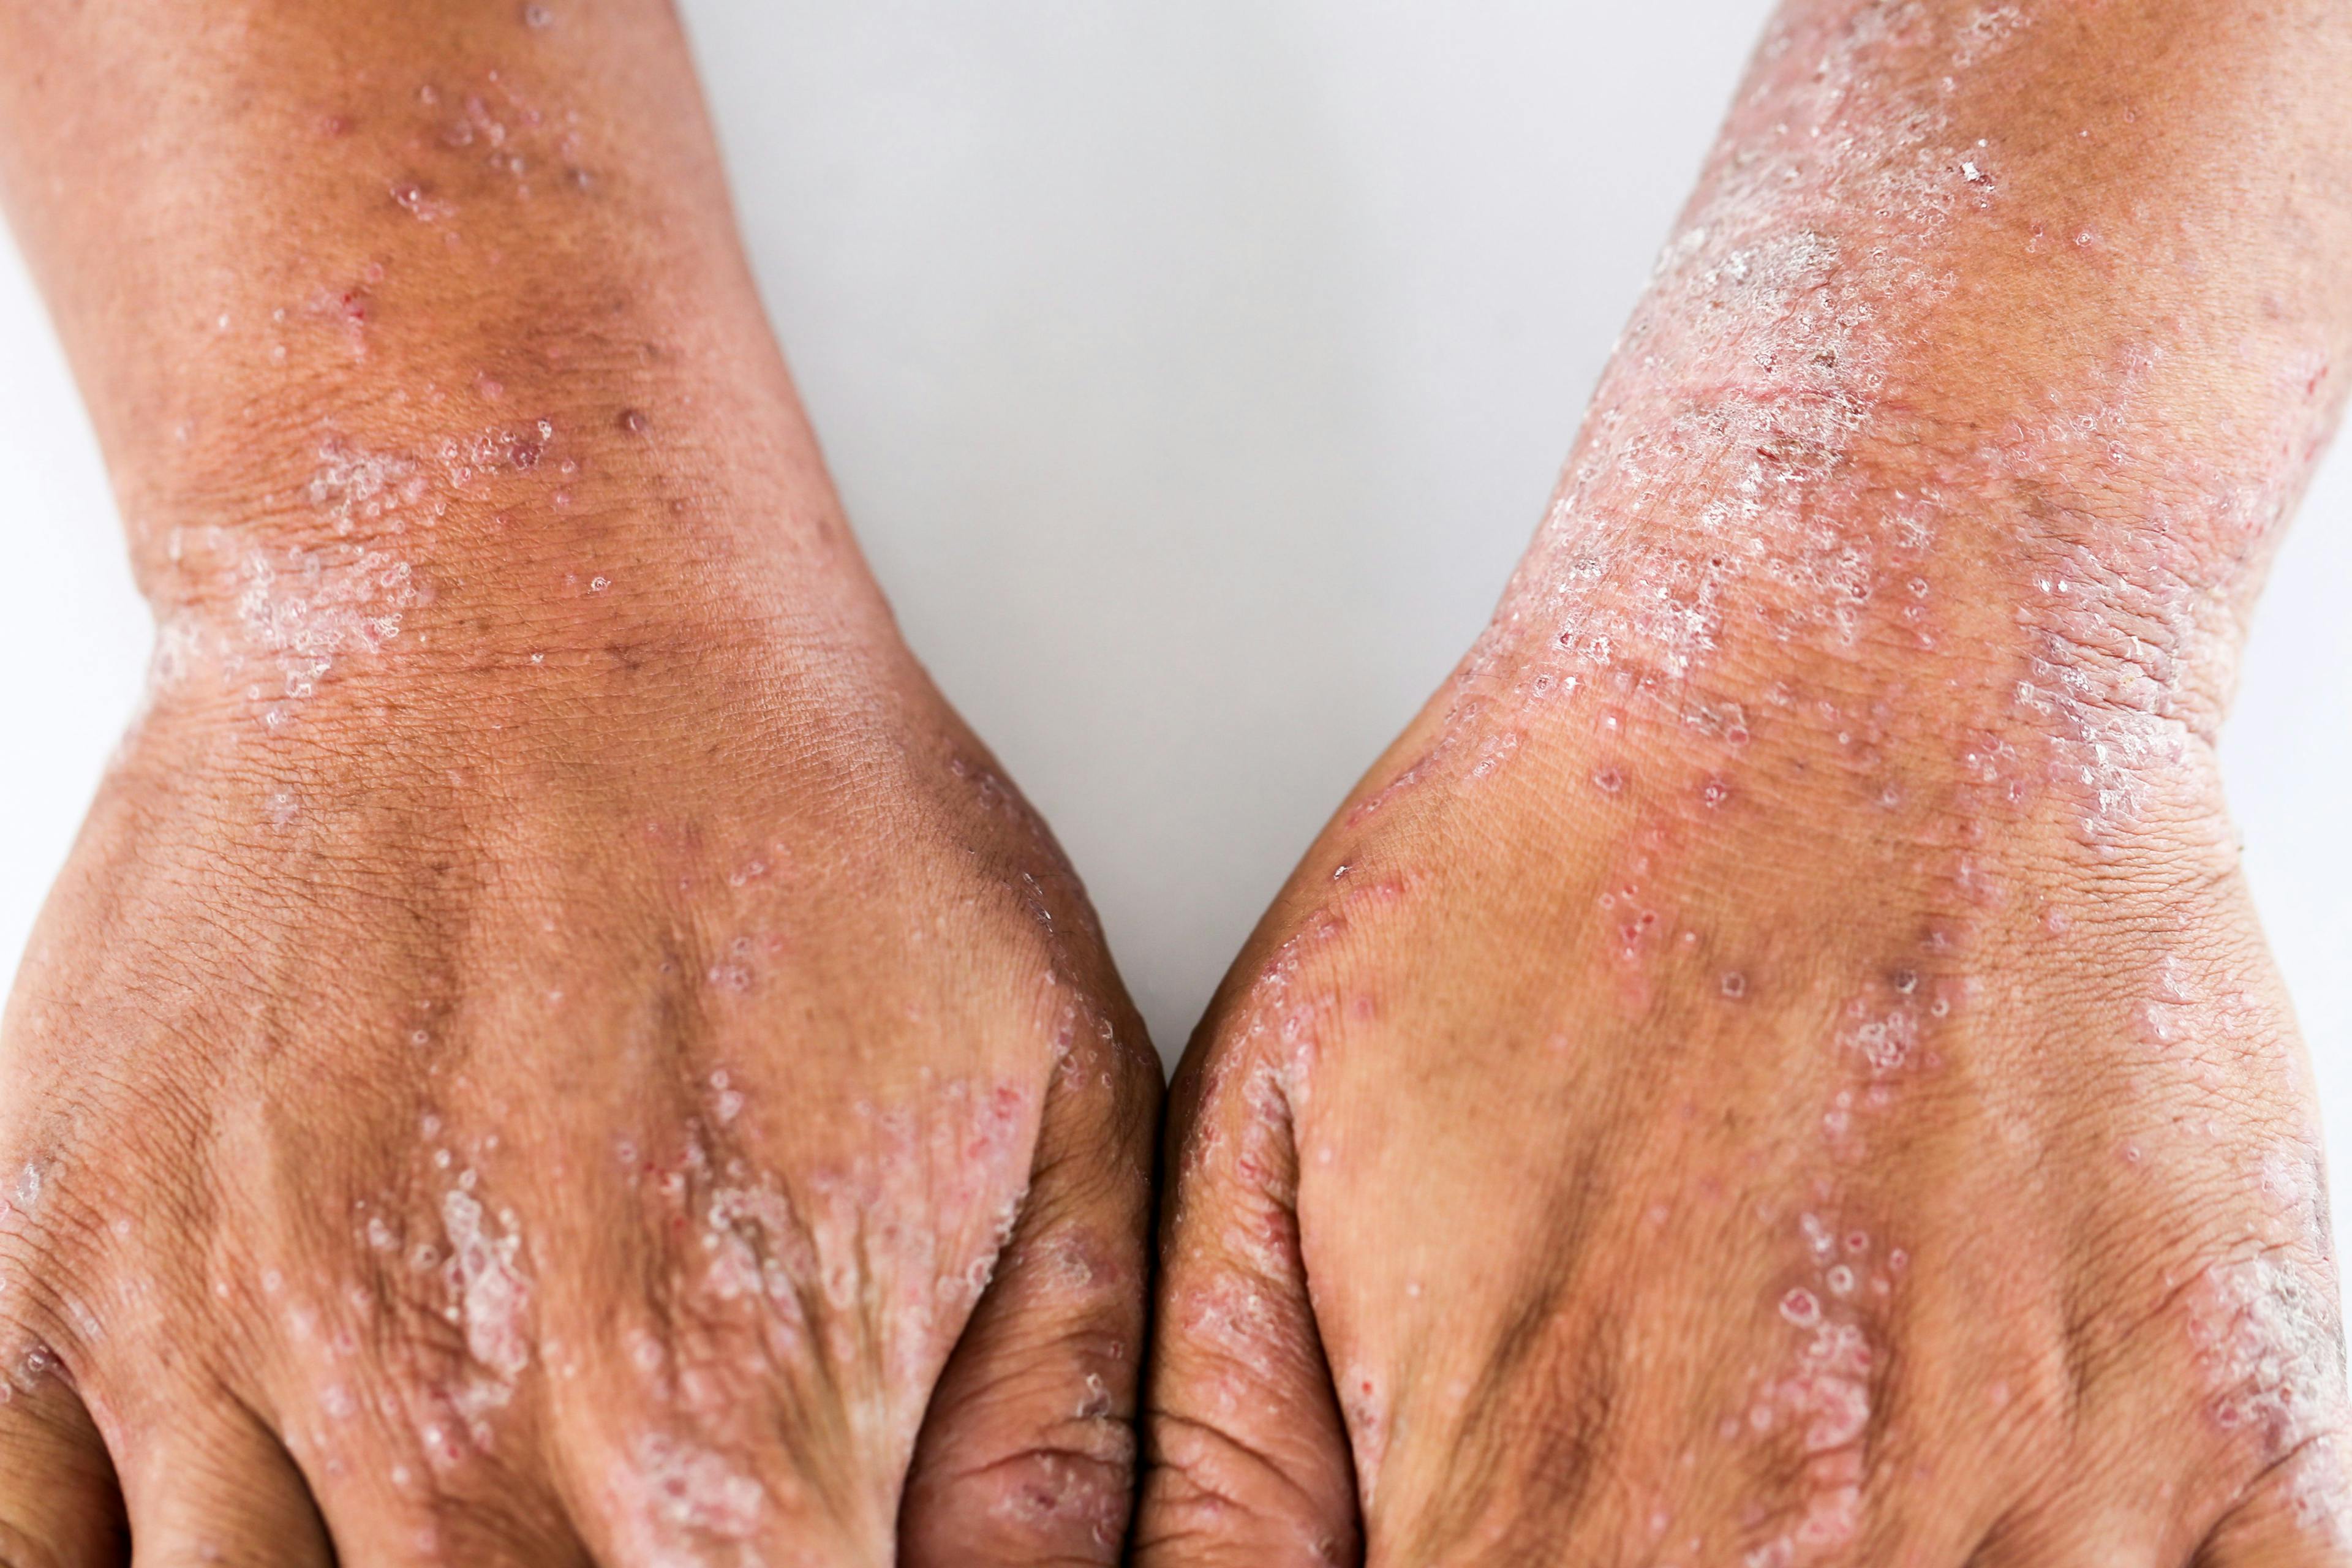 Efficacy of Tapinarof Cream 1% Demonstrated in Atopic Dermatitis in Skin of Color